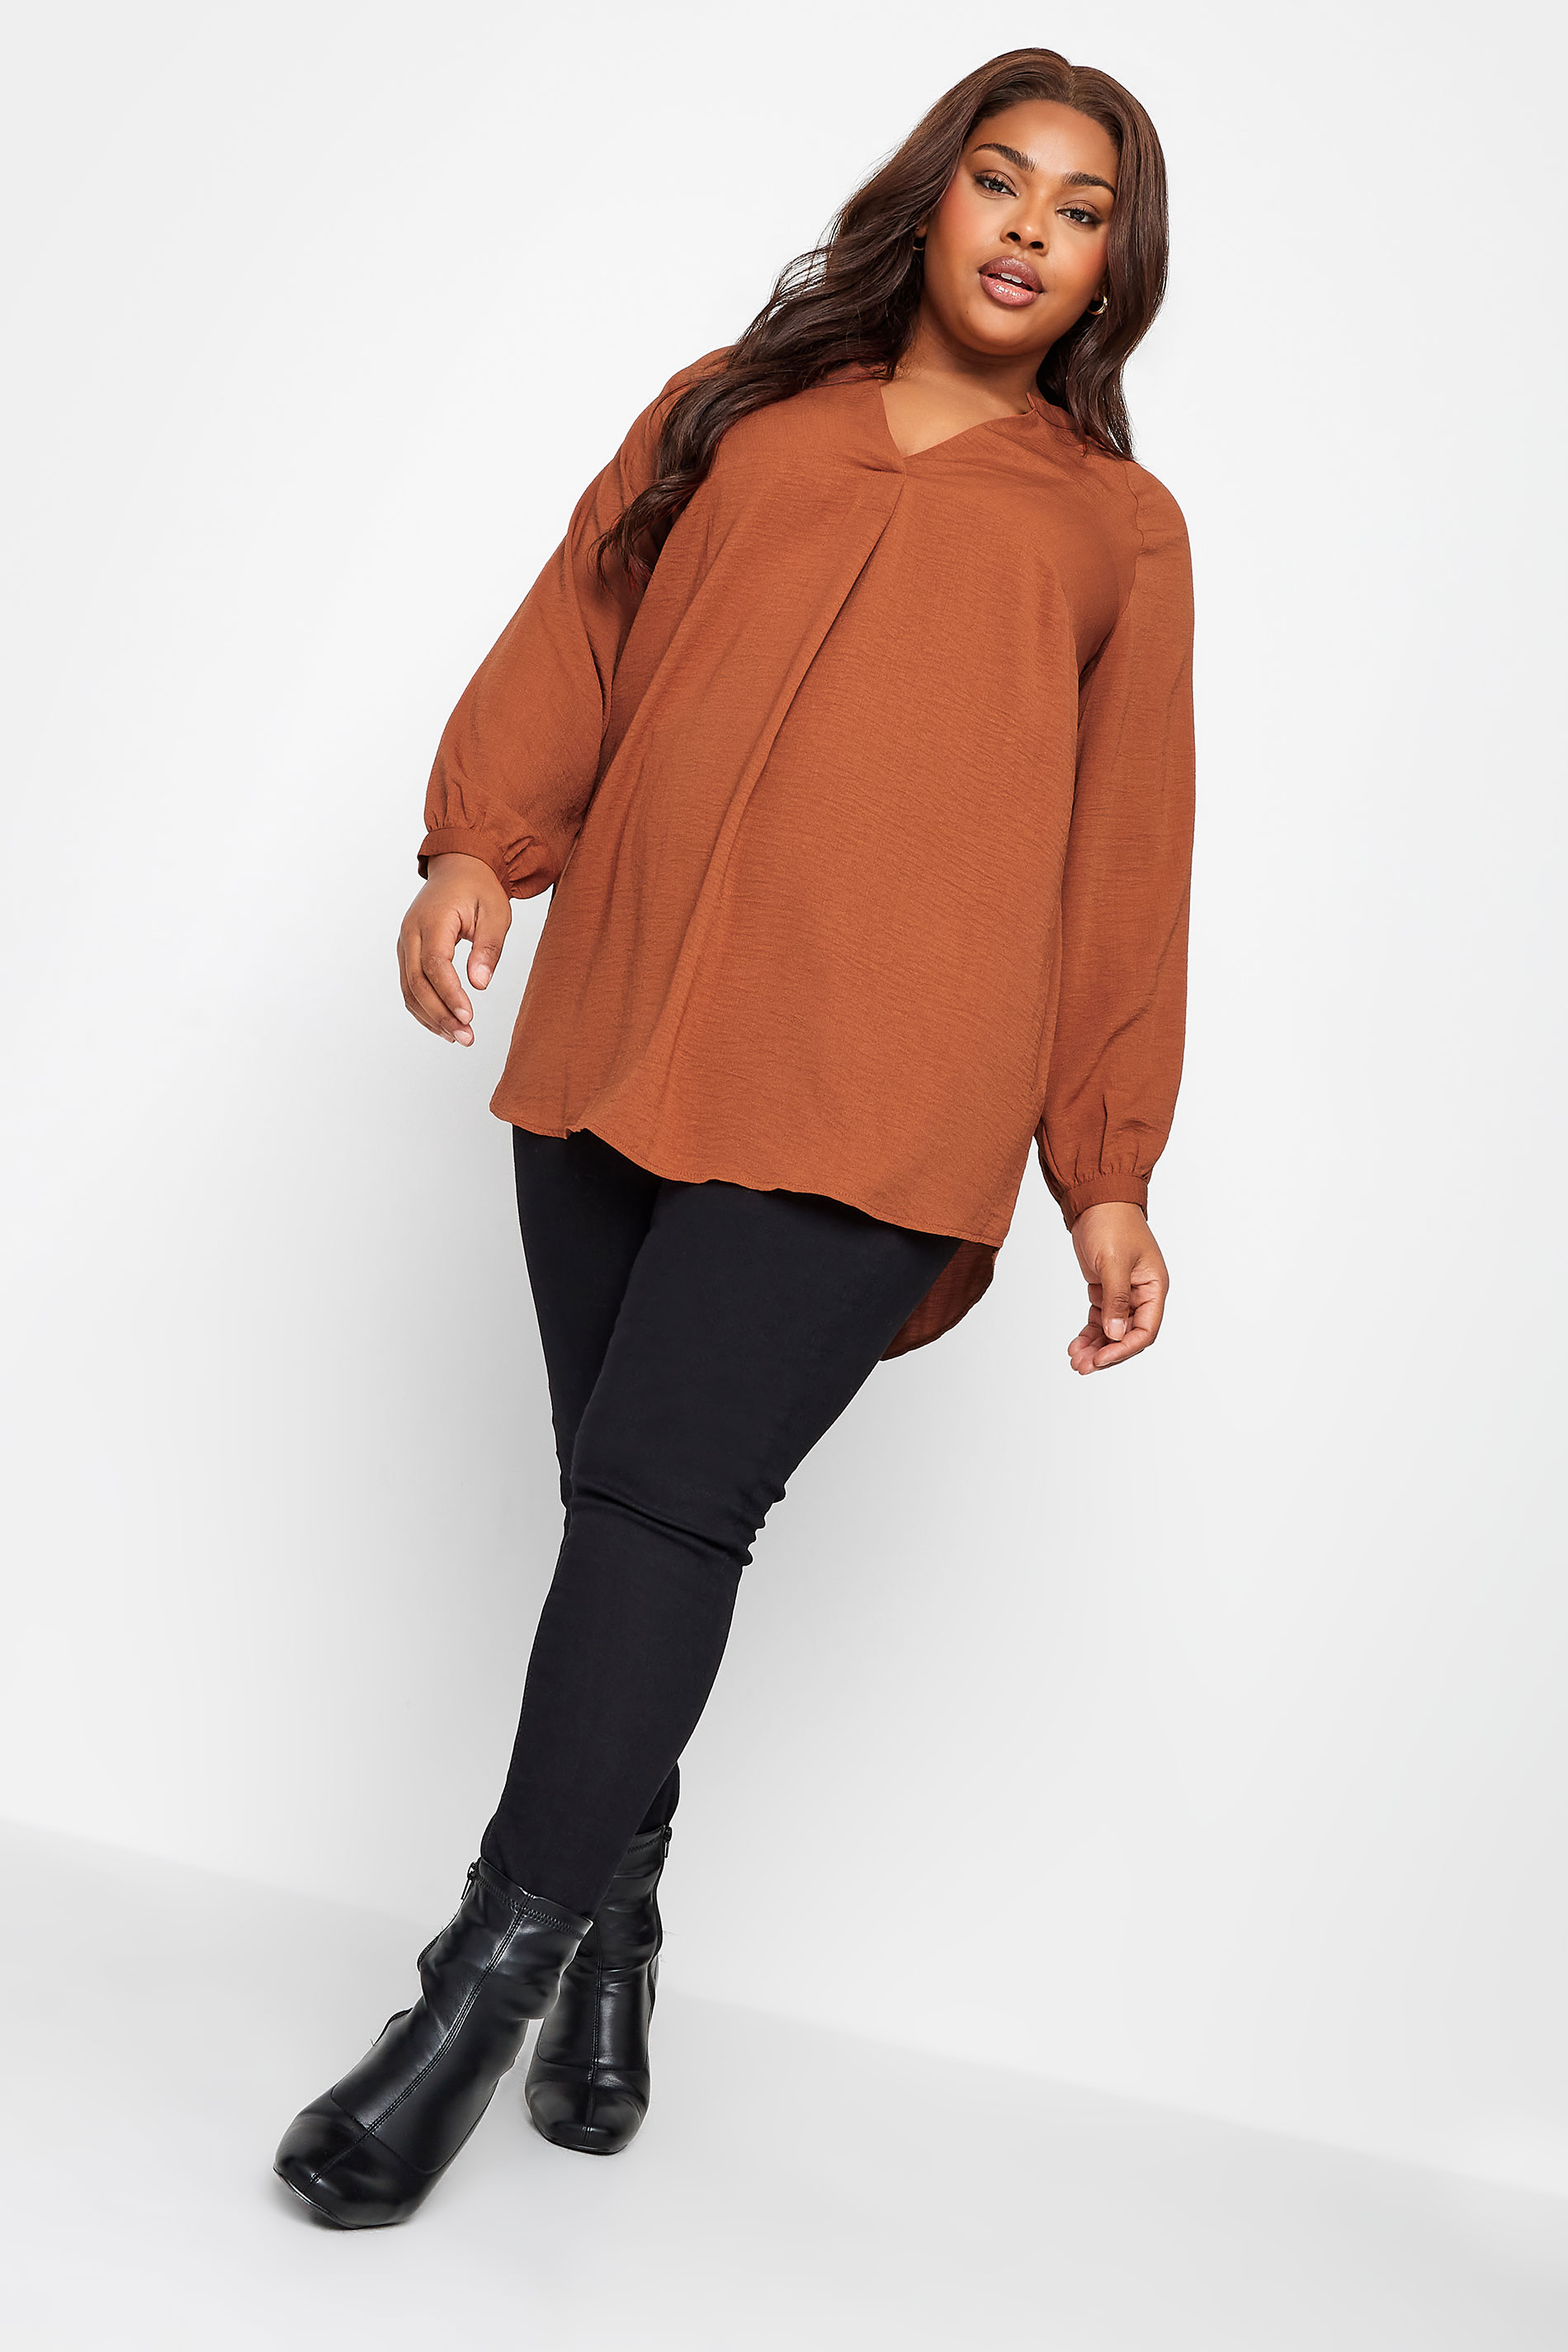 YOURS Curve Plus Size Rust Orange Textured Tunic Shirt | Yours Clothing  2